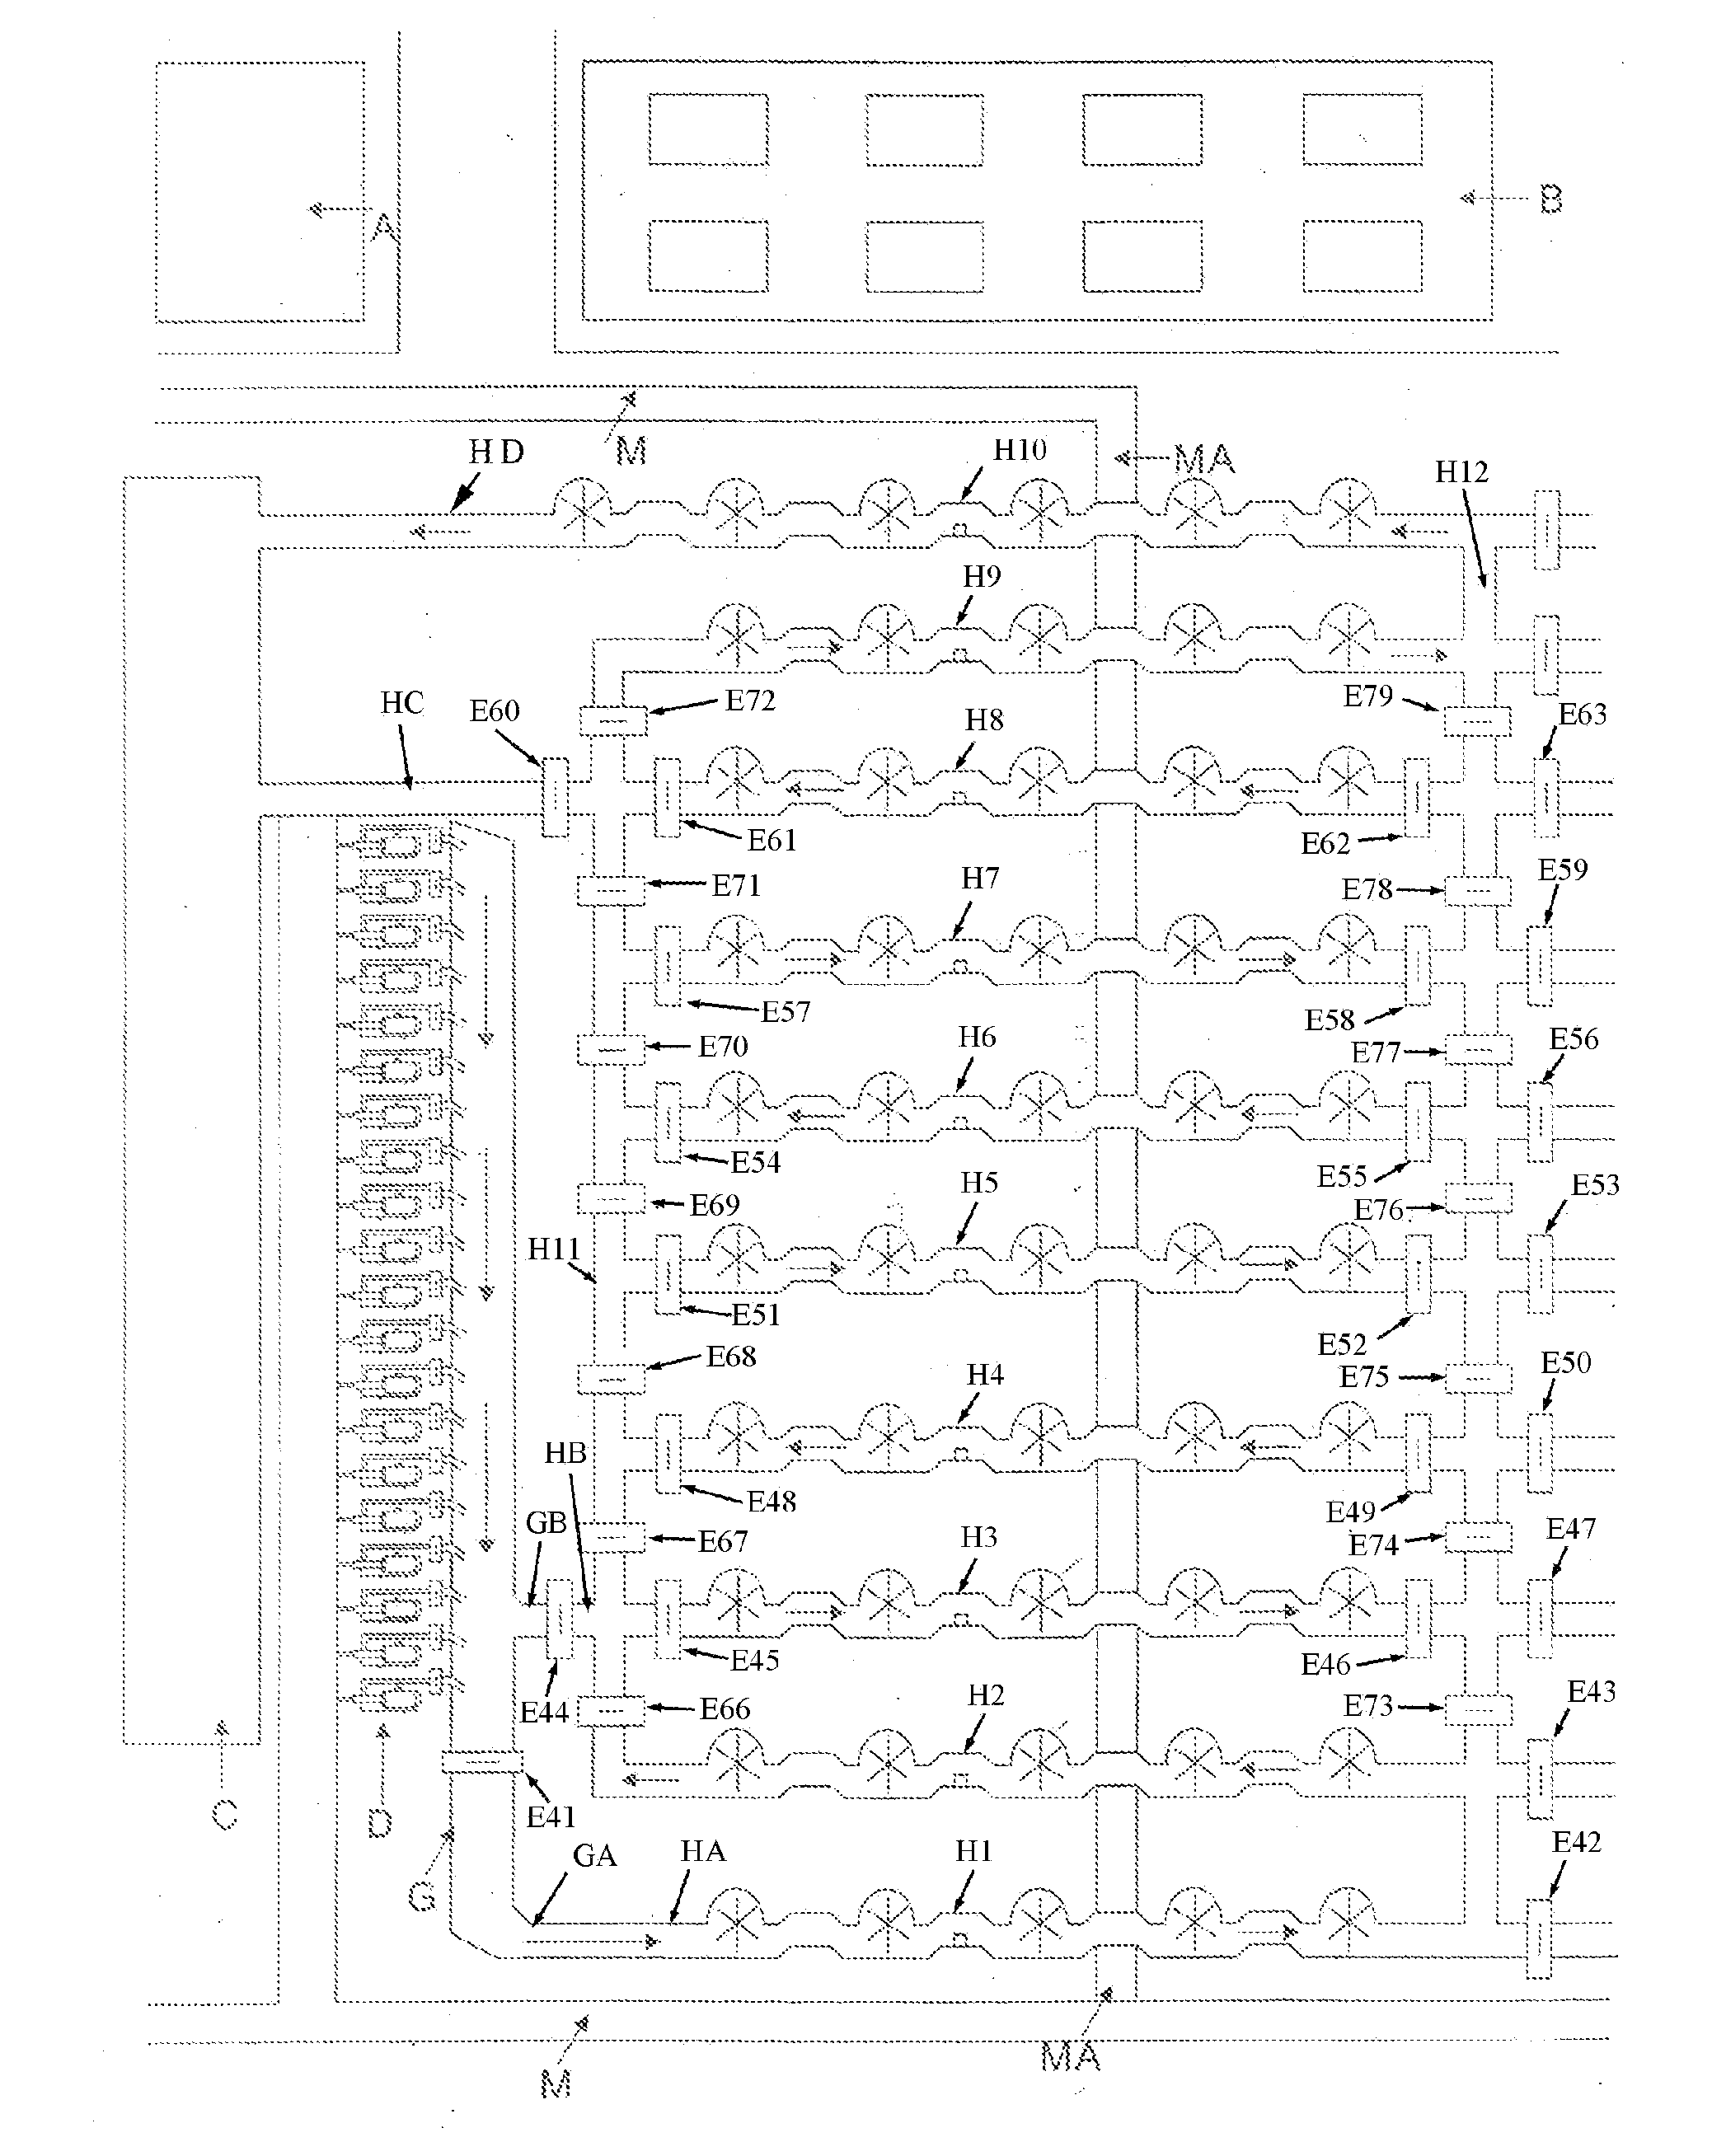 Expandable multi-set circulation hydroelectric power generation method and system